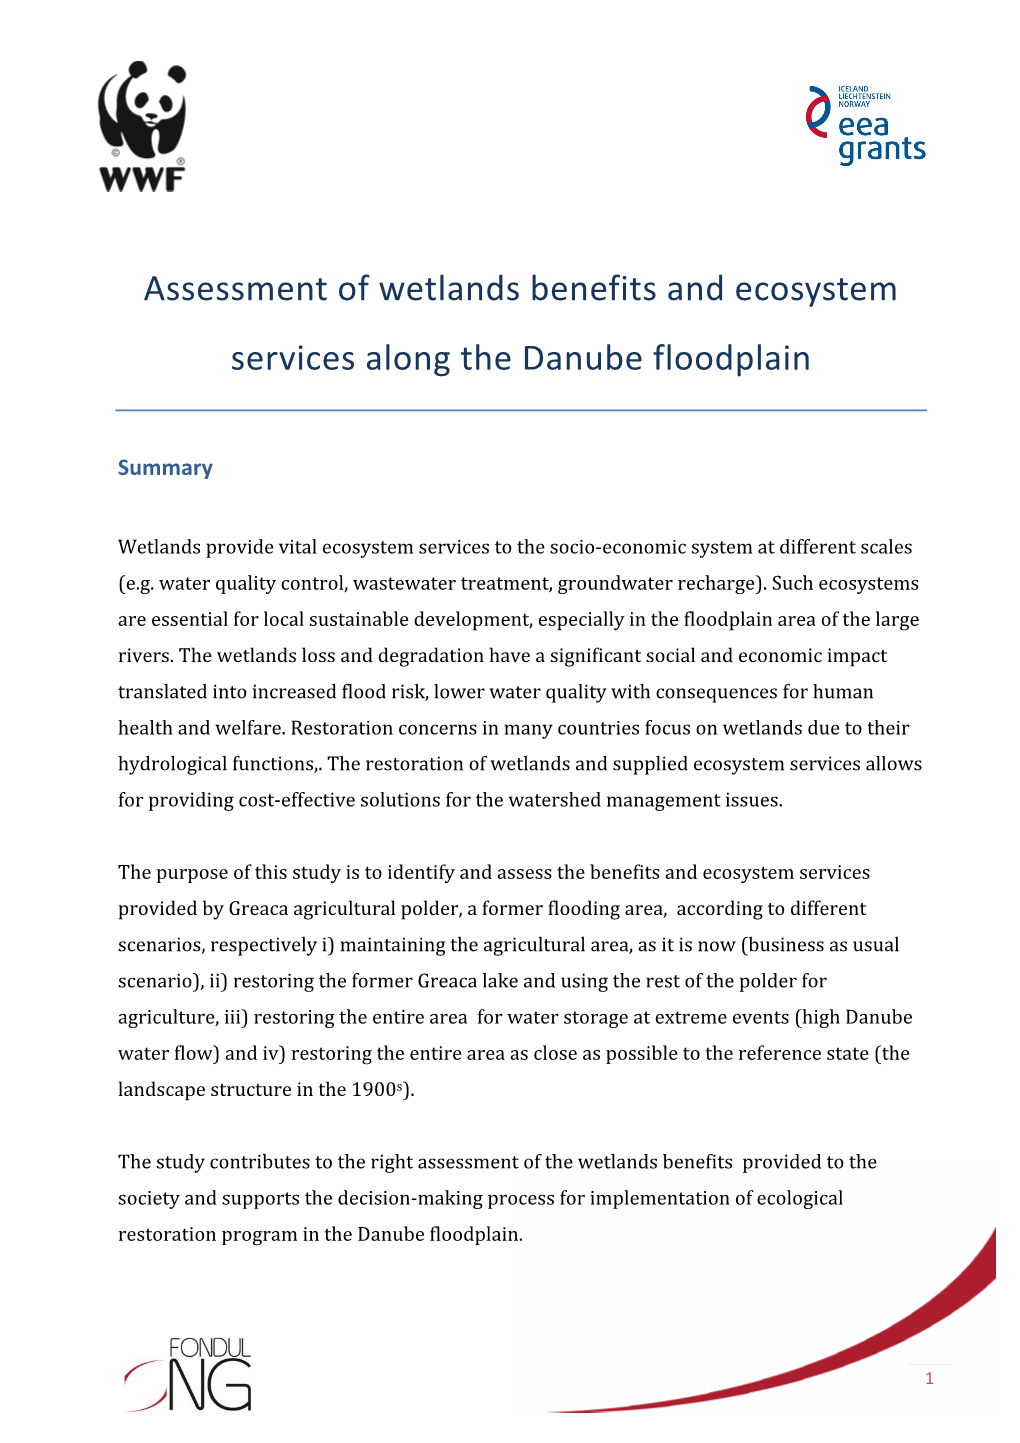 Assessment of Wetlands Benefits and Ecosystem Services Along the Danube Floodplain